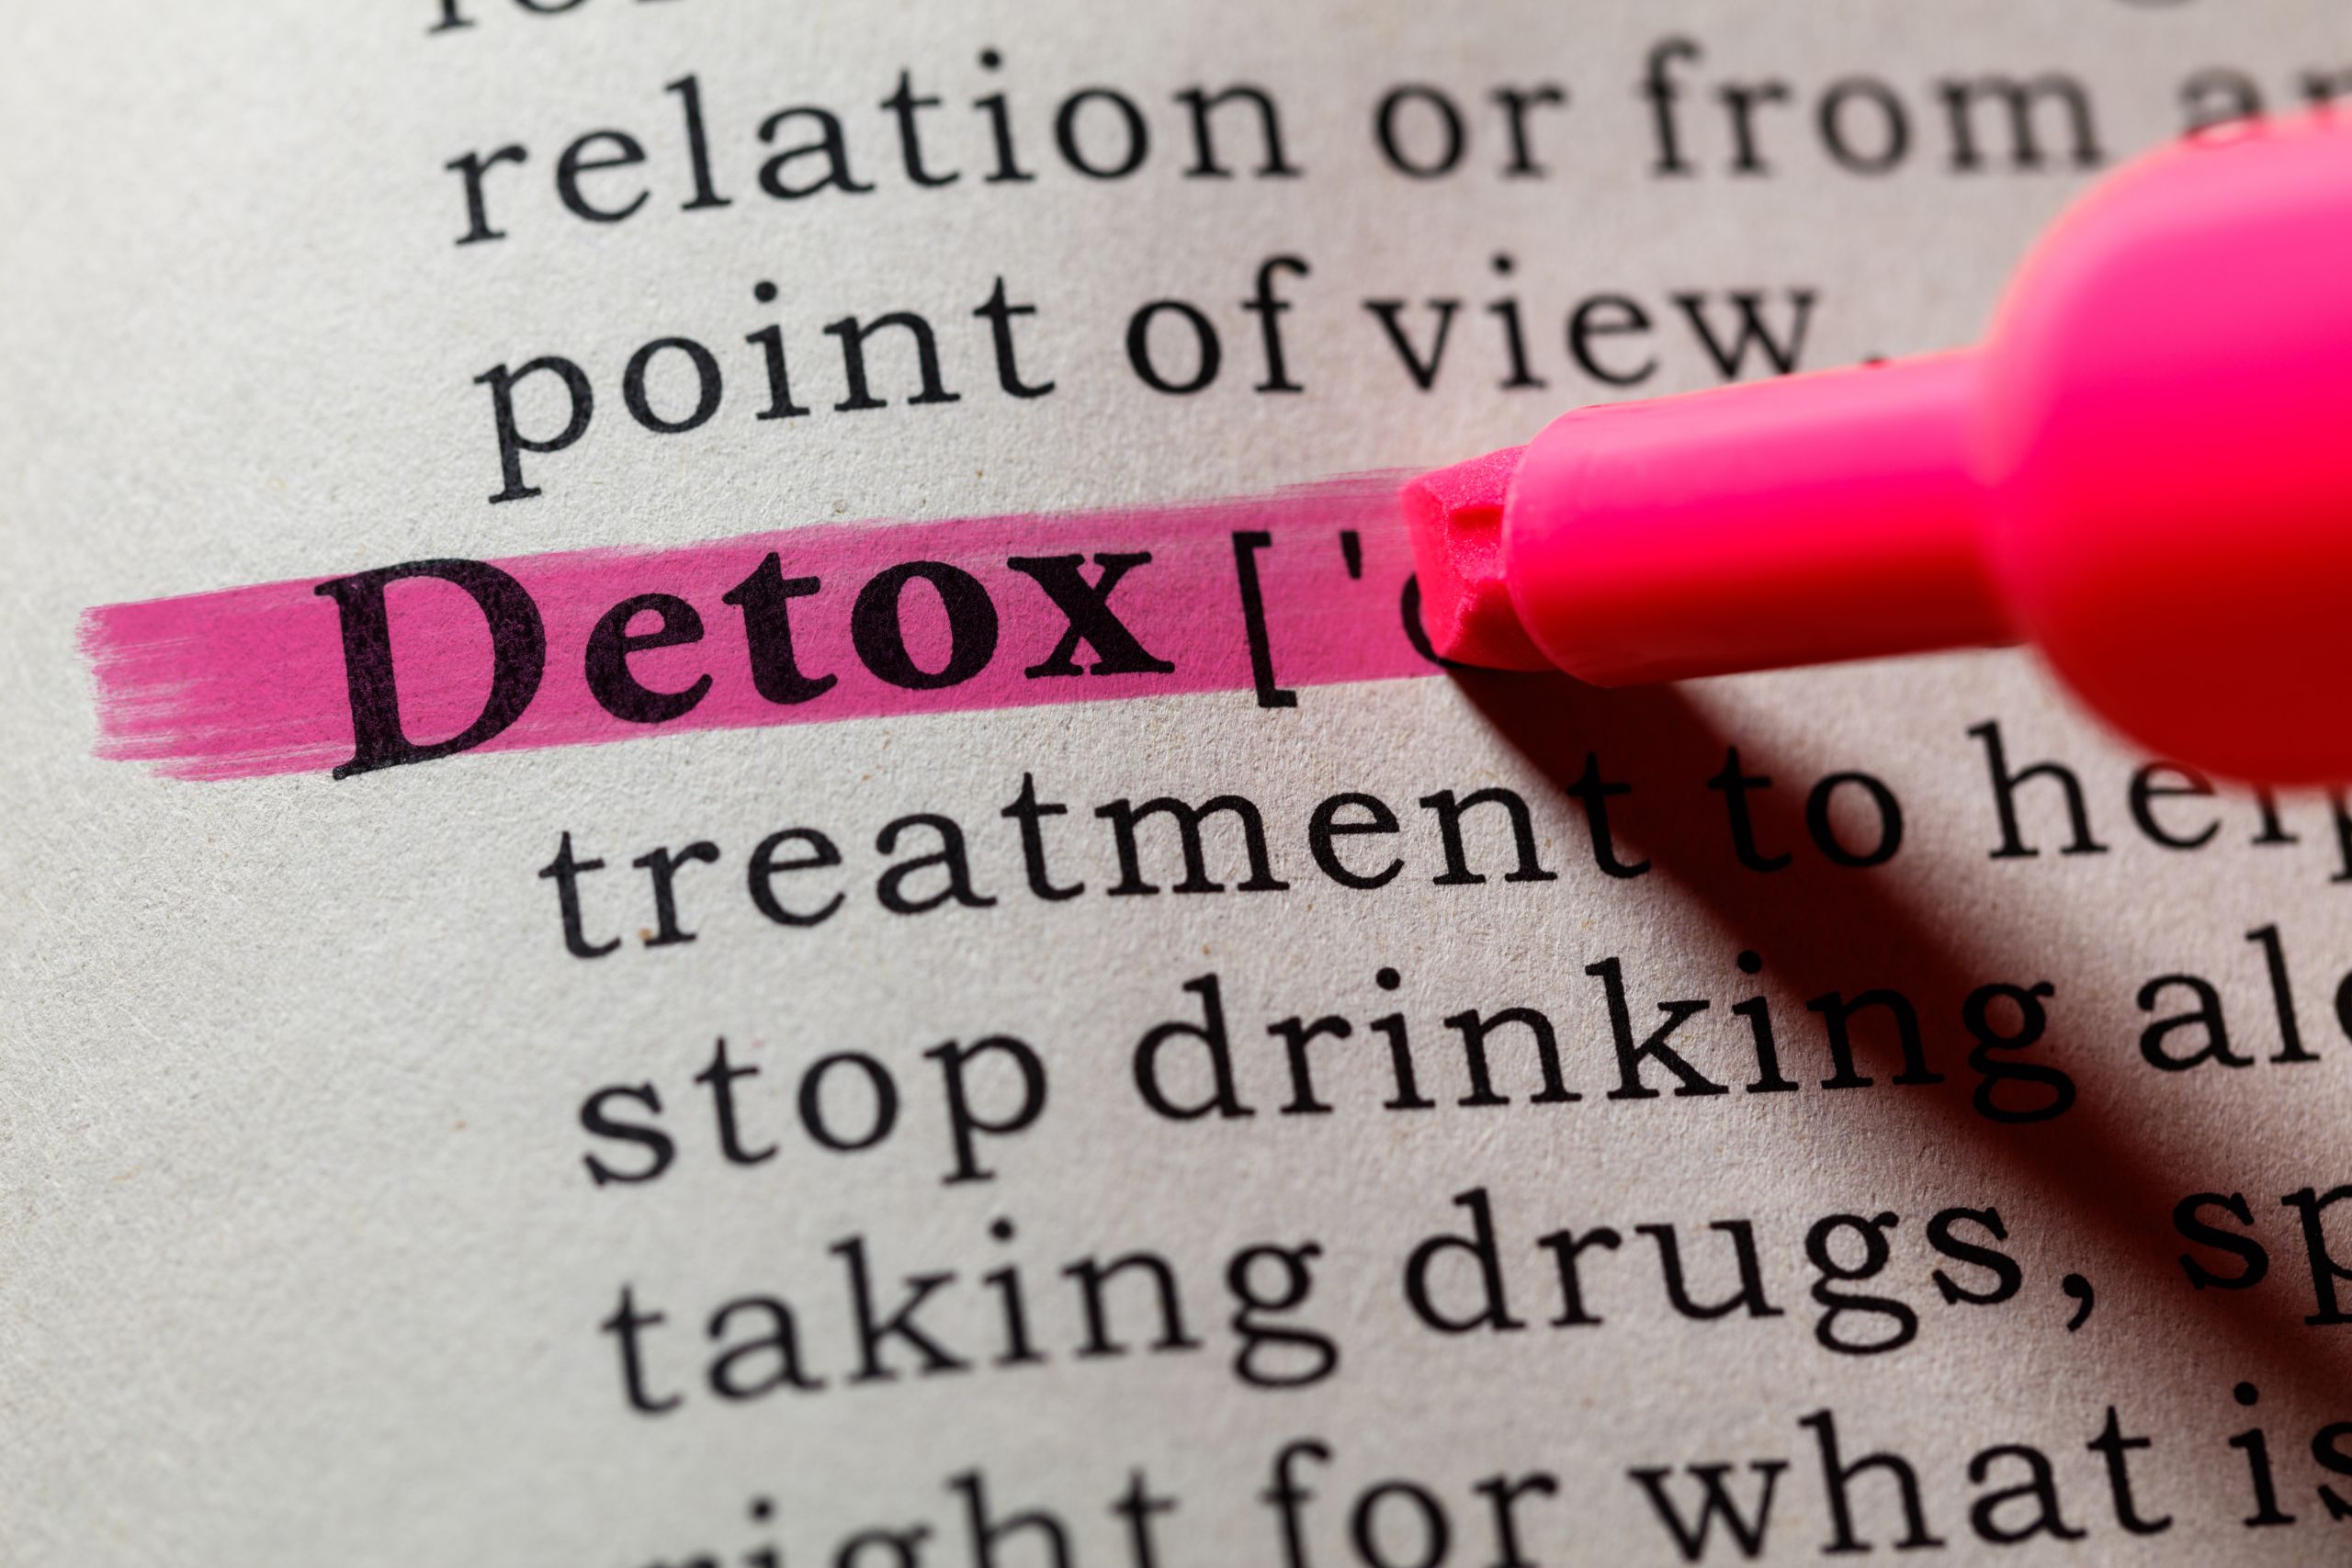 A felt tip highlighter highlighting the word "Detox" in a dictionary